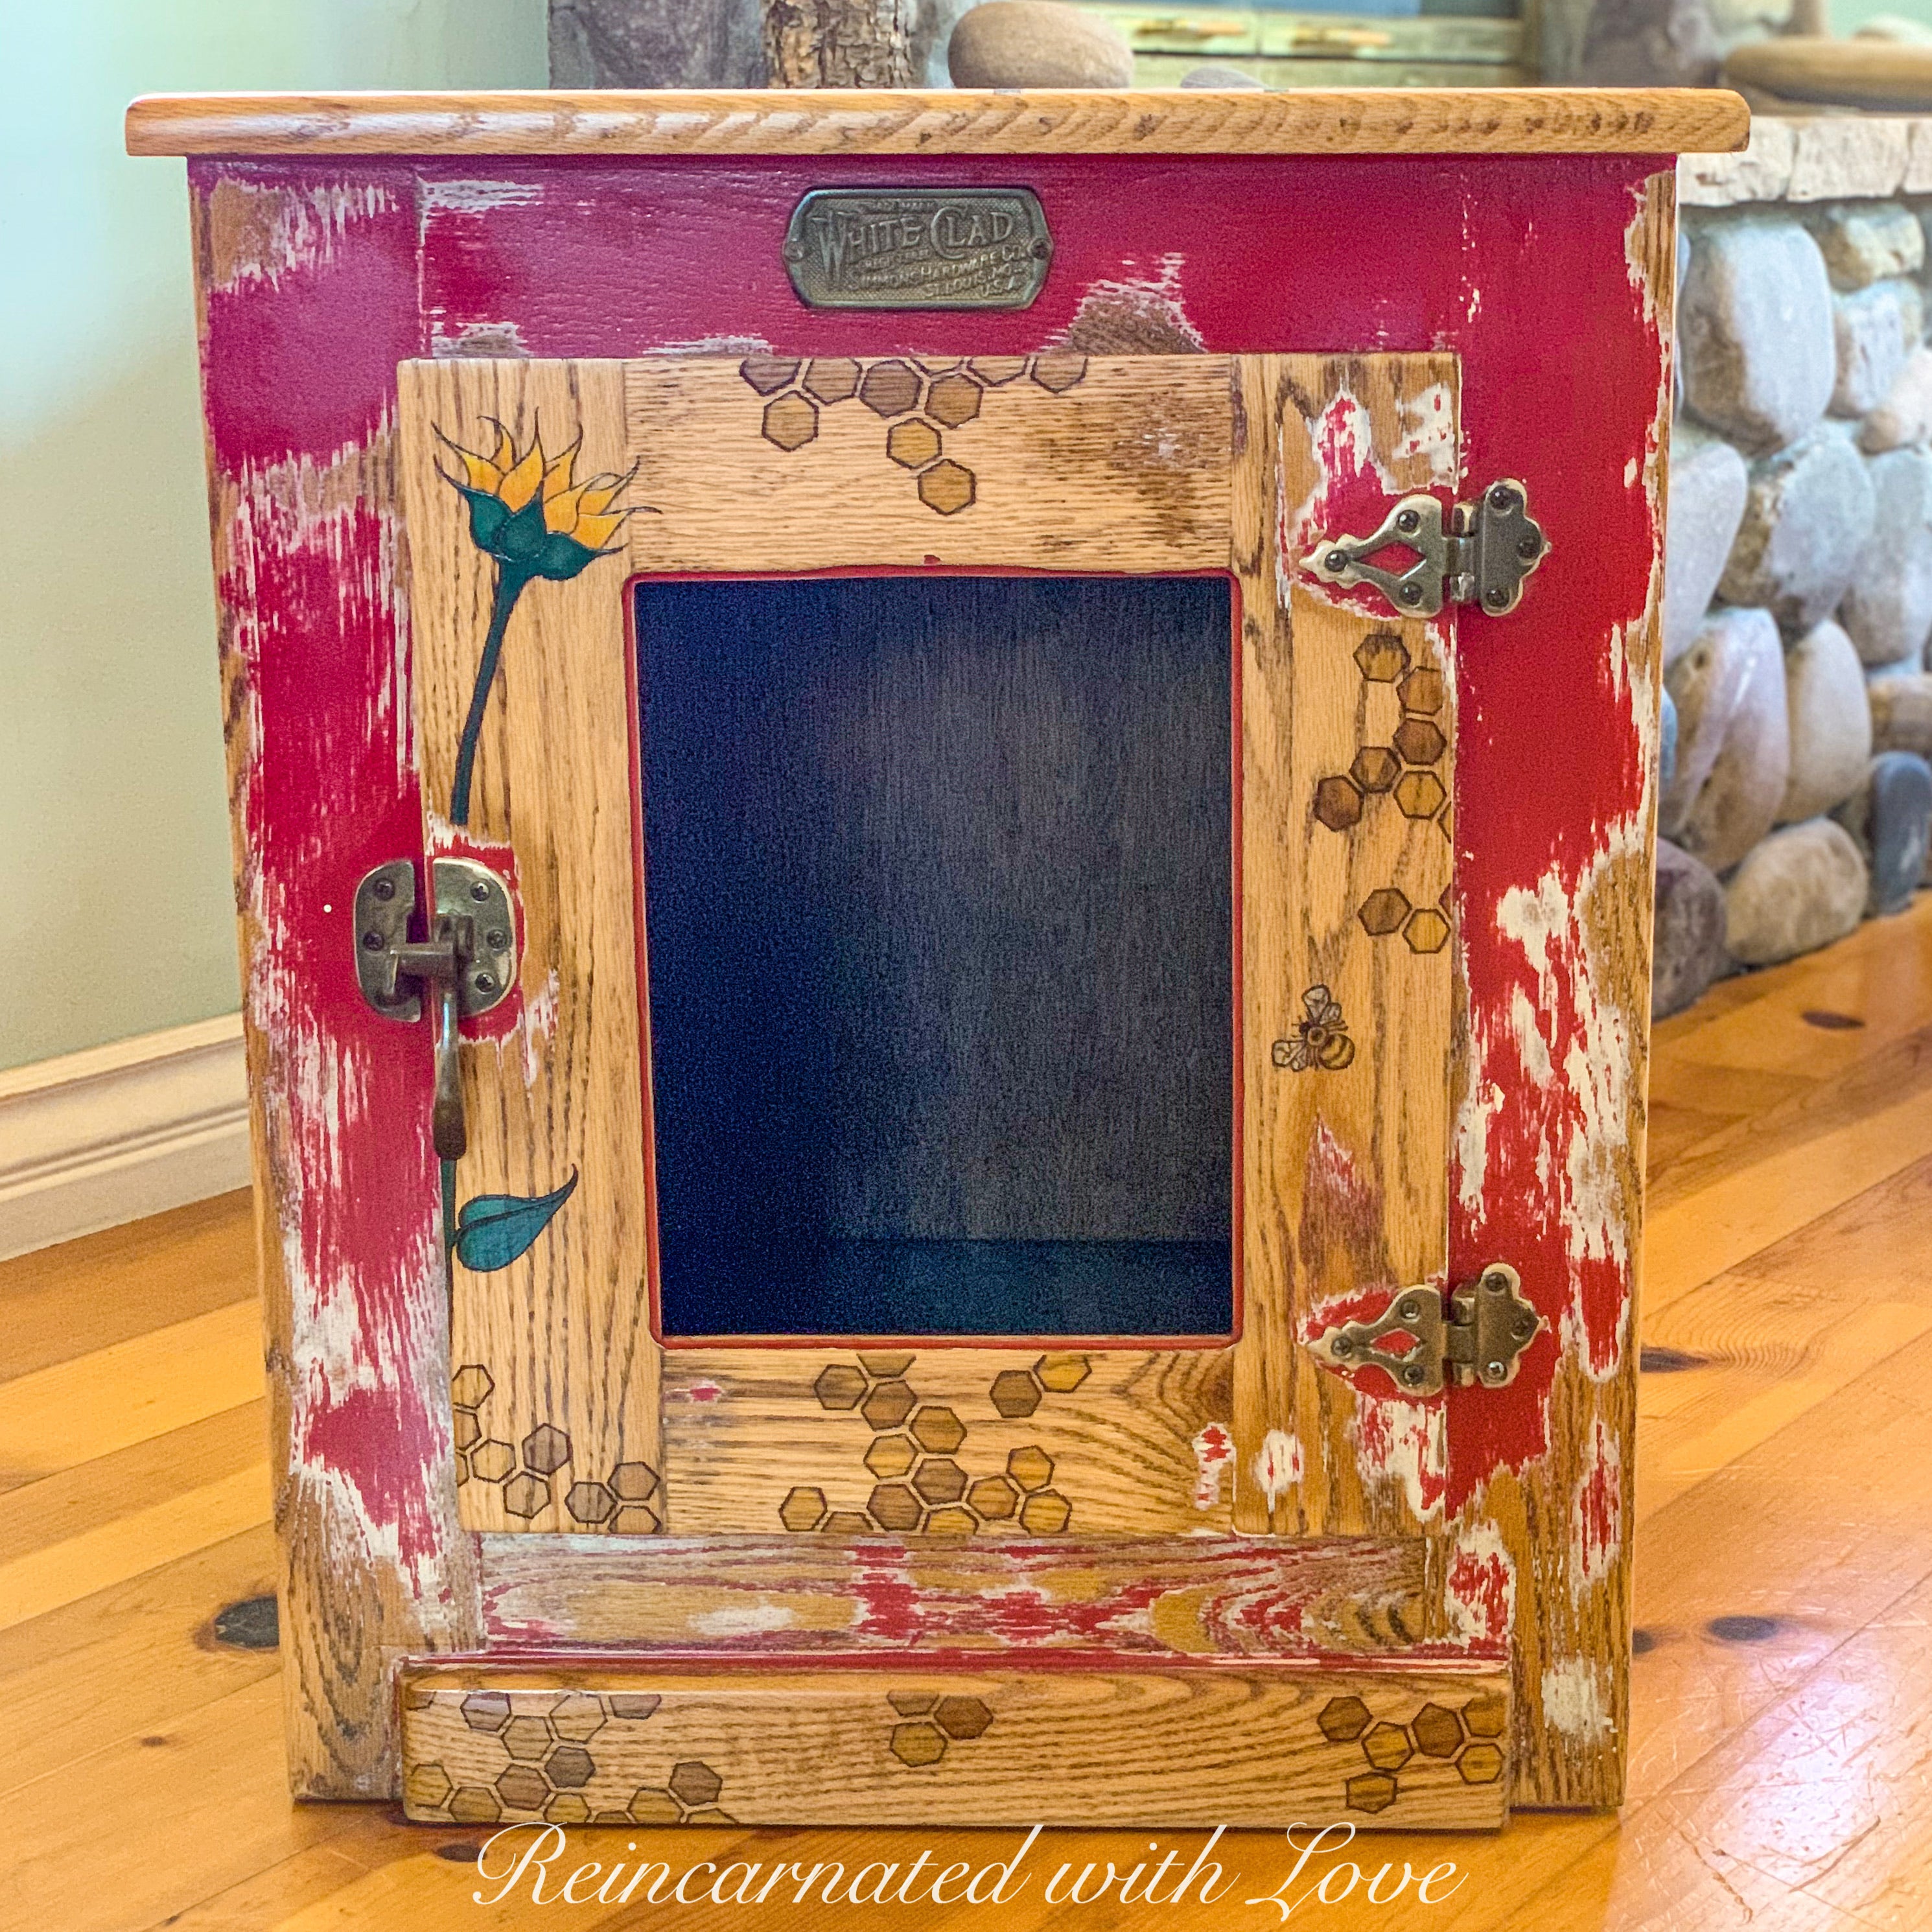 A red farmhouse end table repurposed as a cat cave with honeycomb & bee accents over solid wood.